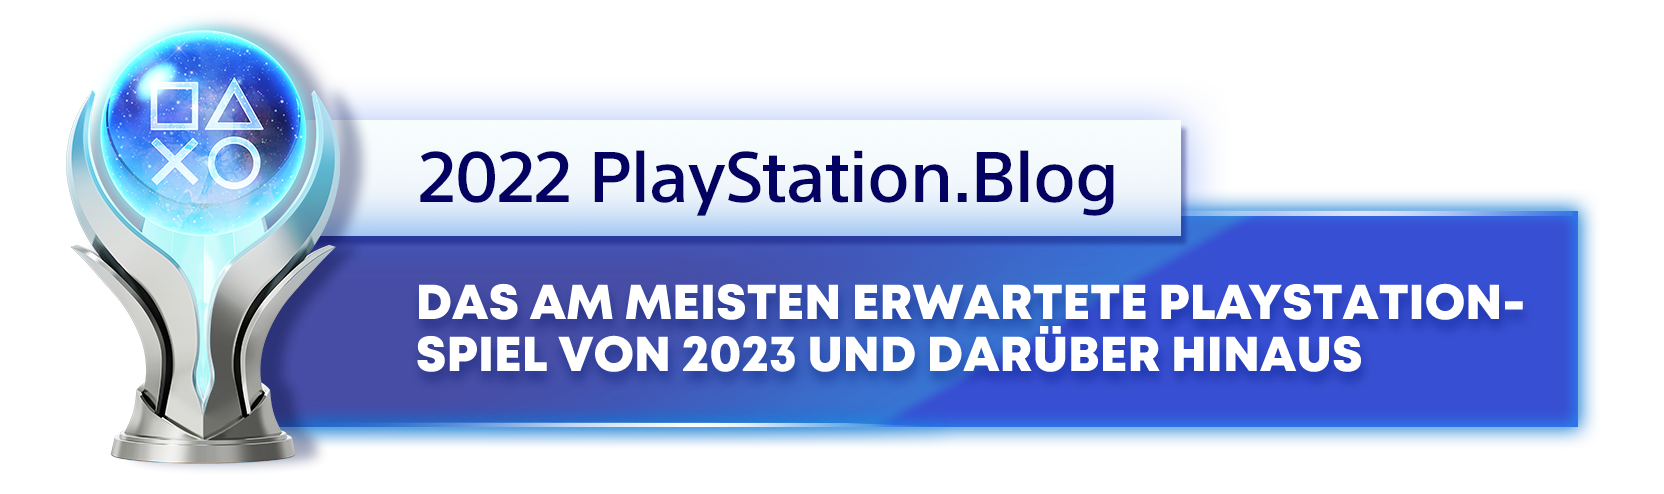 a4ca6f23dae61a42d568ff21926b7f6f2790b1dd - PS.Blog: Gewinner des Game of the Year 2022